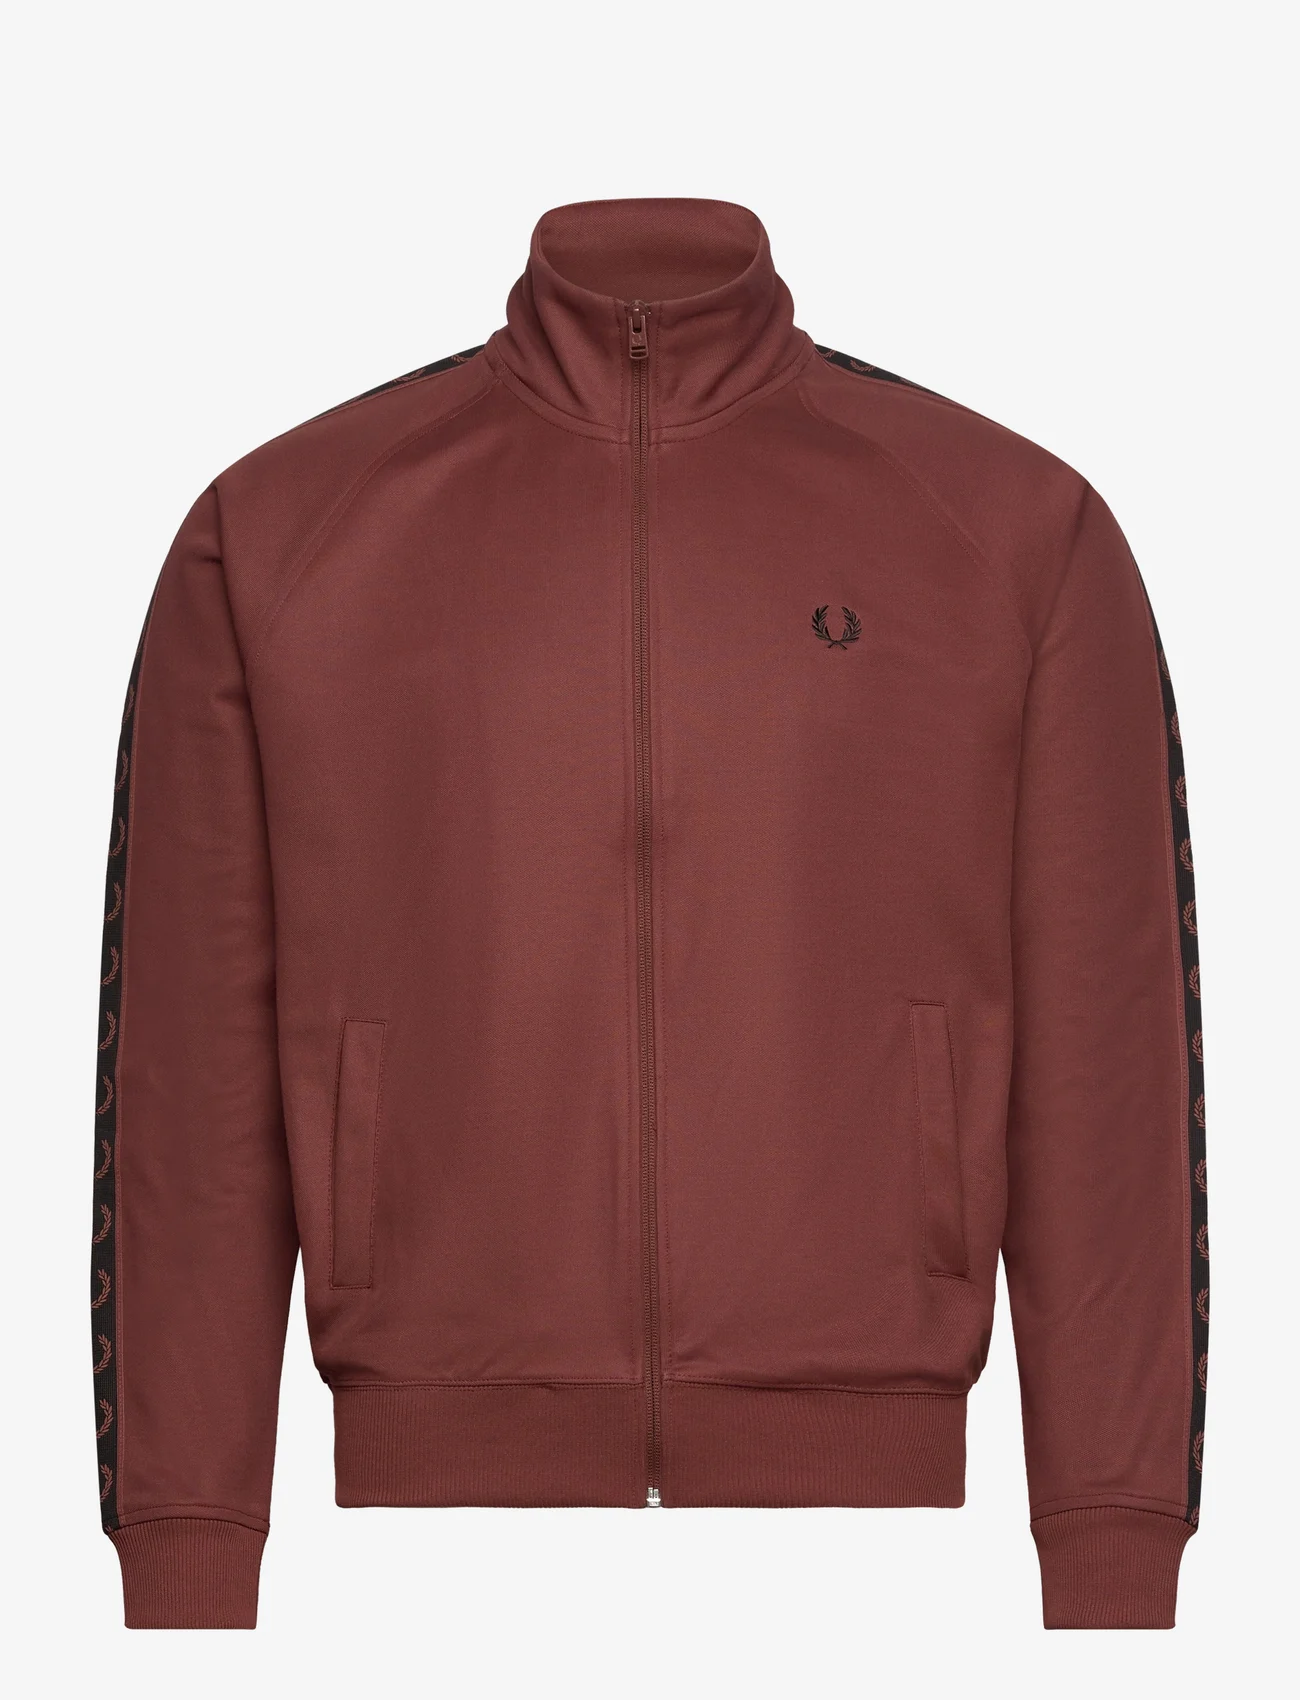 Fred Perry - CONTRAST TAPE TRK JKT - sweatshirts - whskybrwn/blk - 0